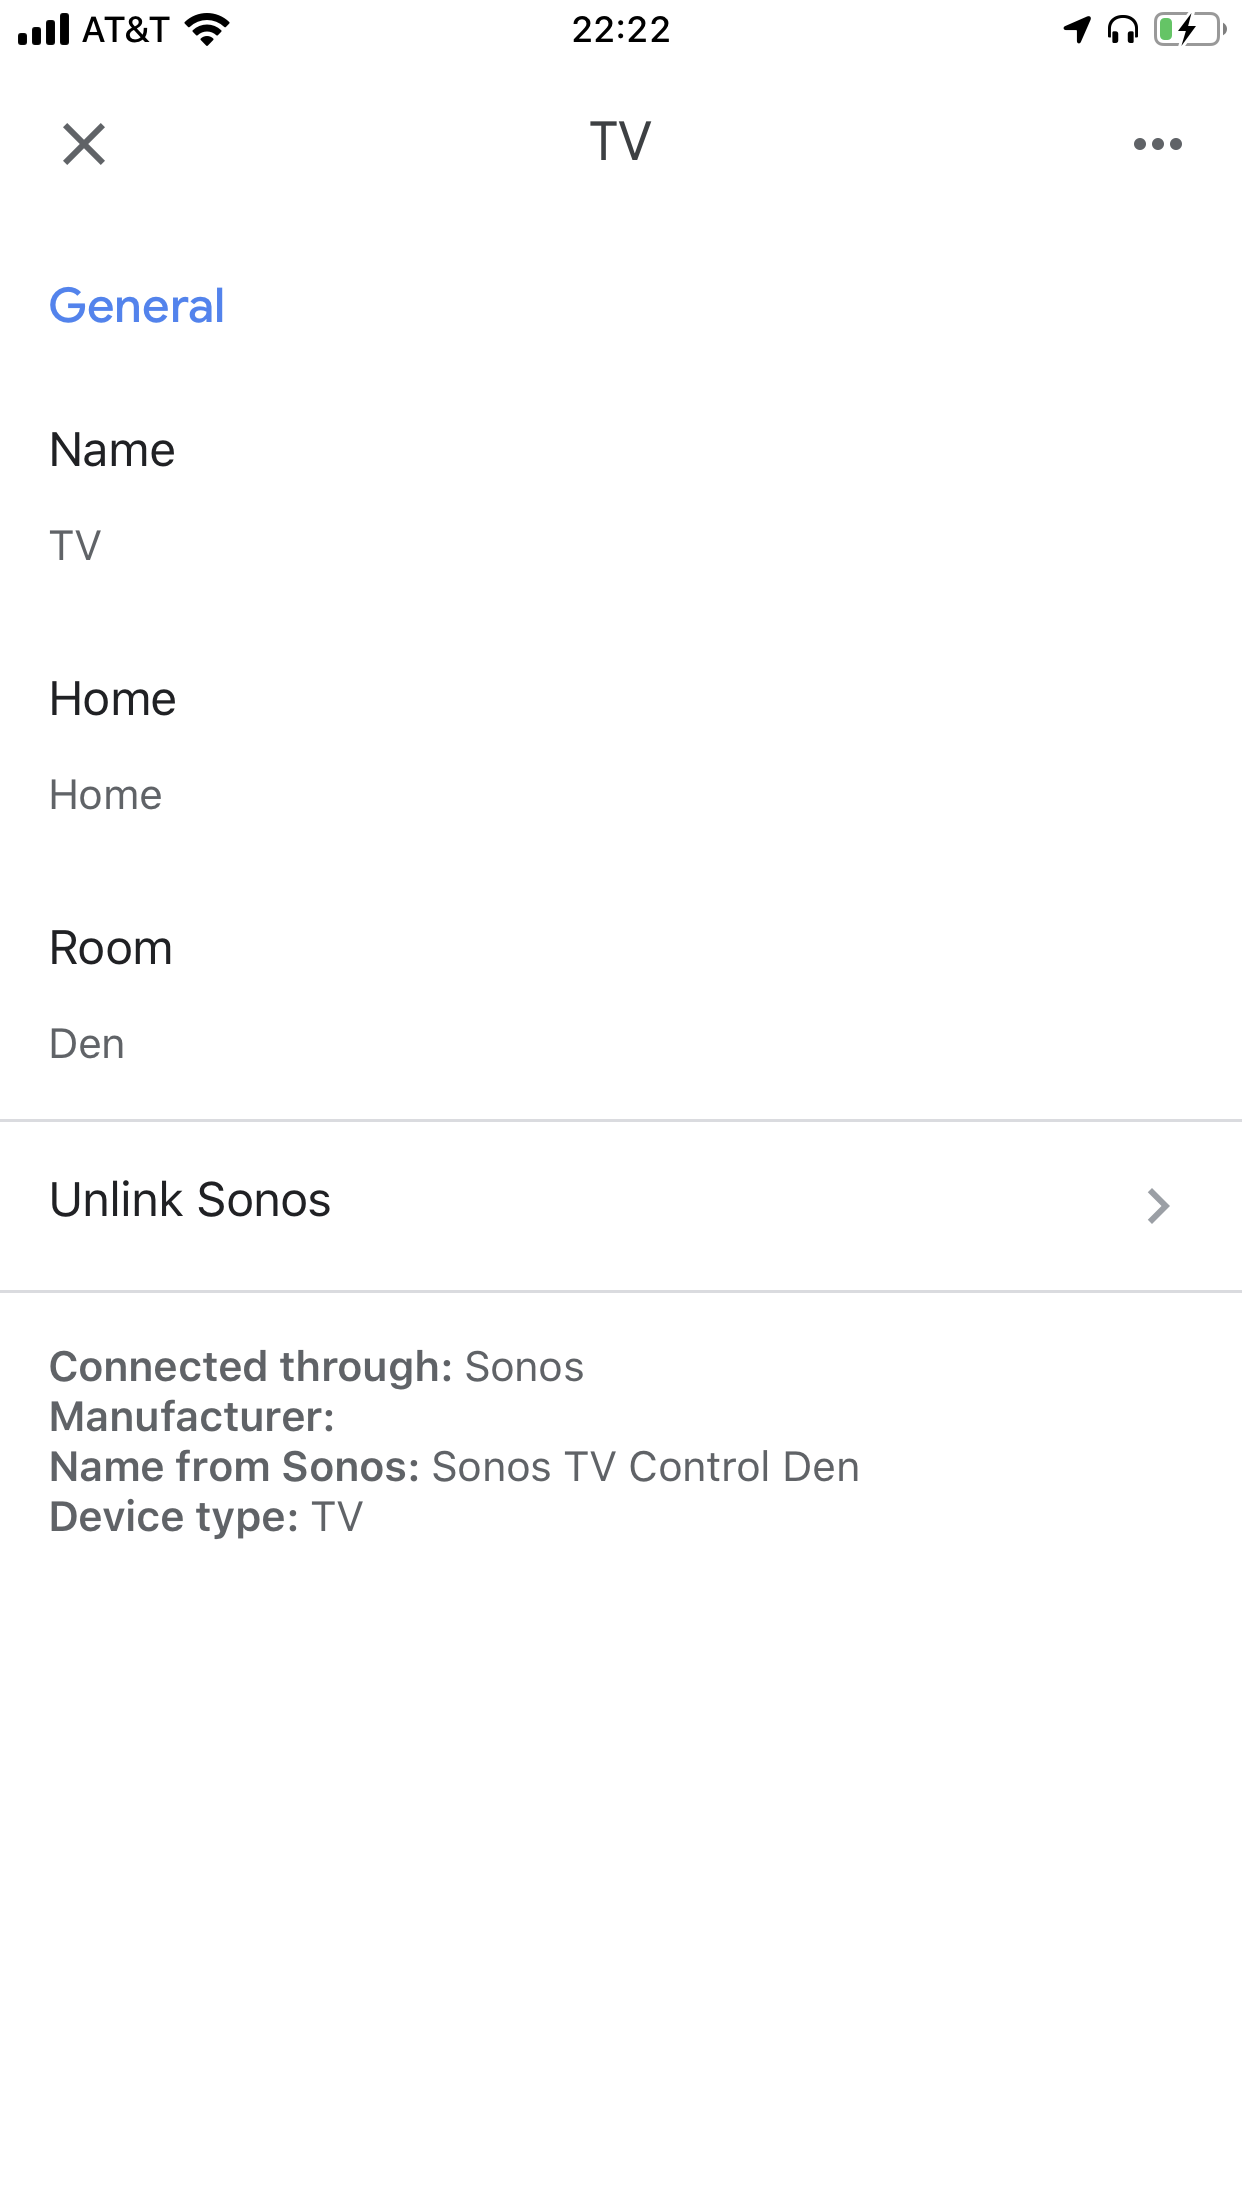 Can no longer turn OFF Vizio TV with Google Assistant and Sonos Amp over HDMI ARC Community